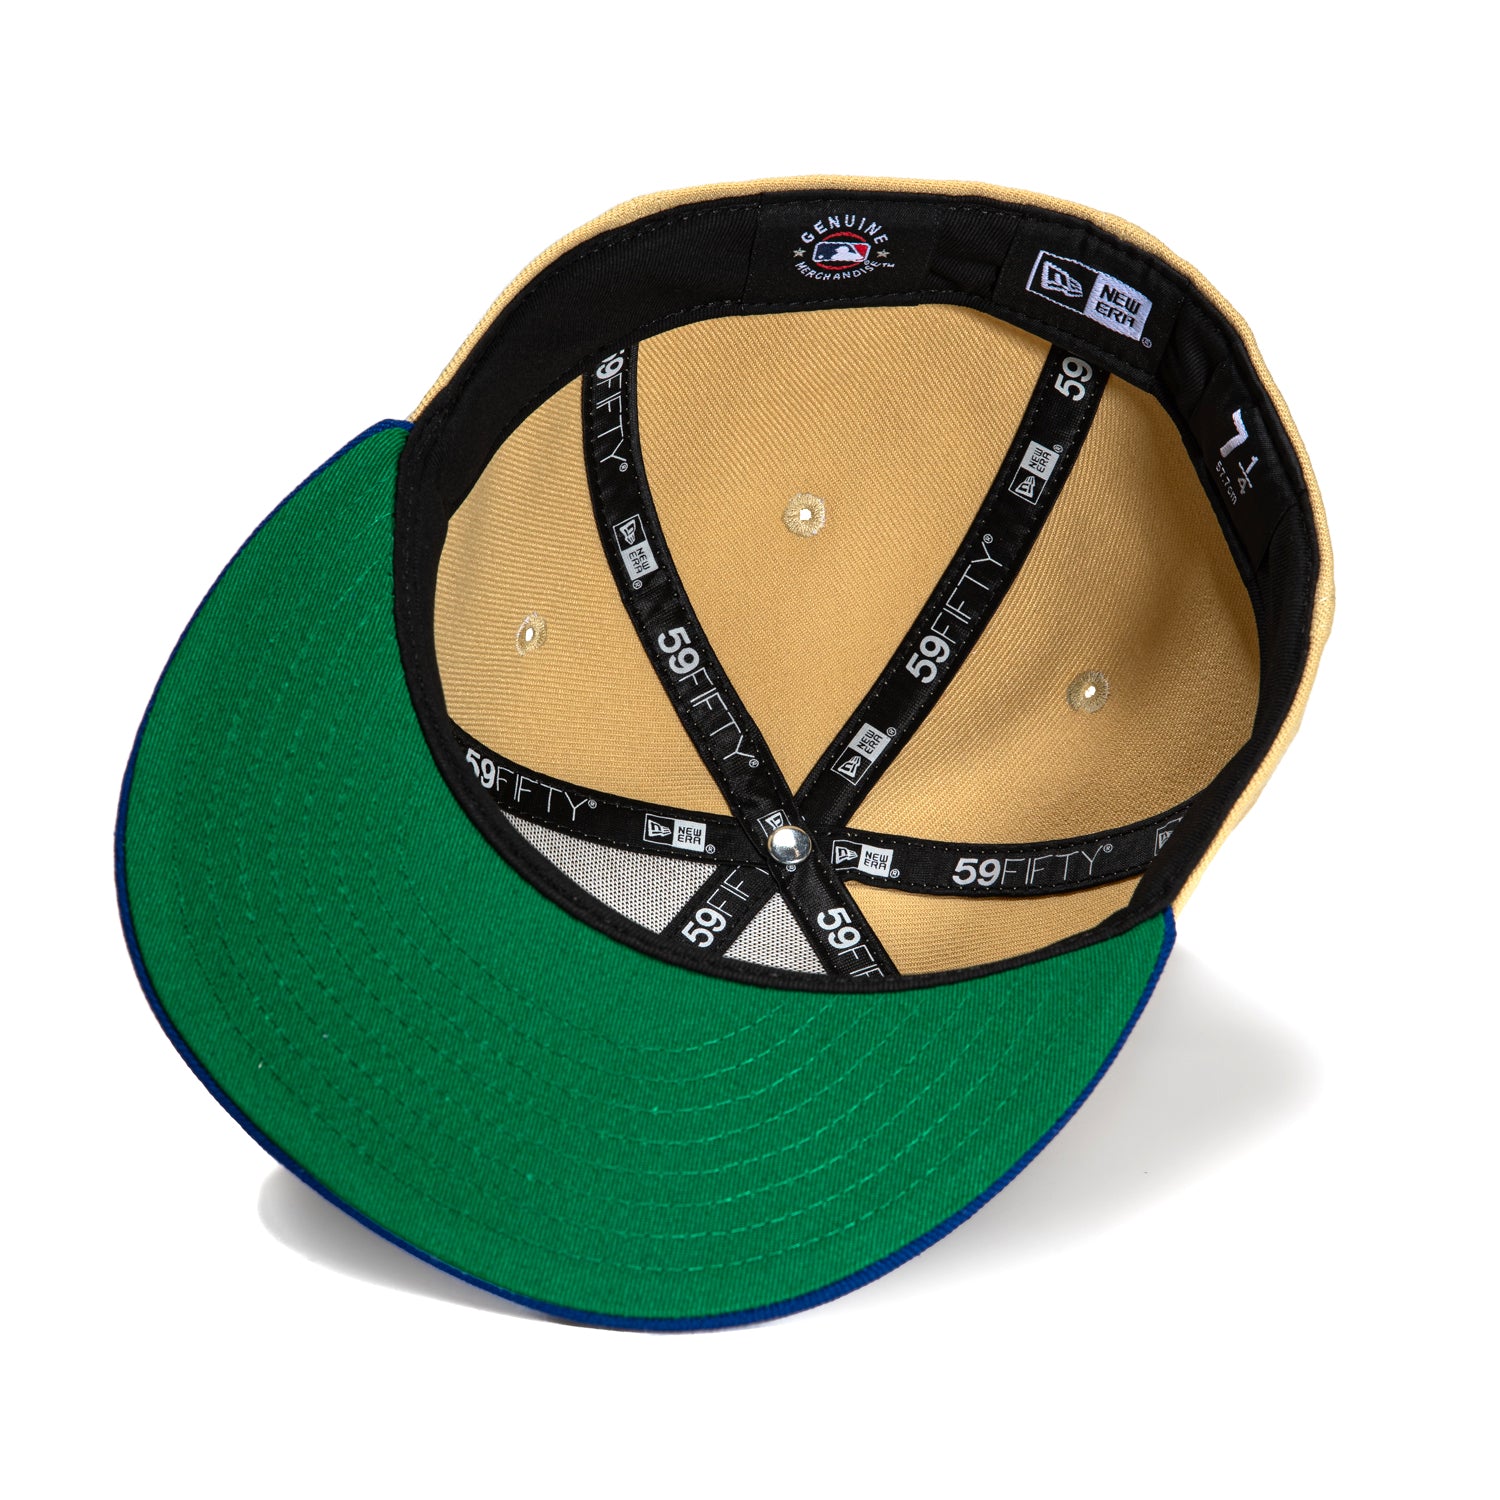 New Era 59Fifty Seattle Mariners 2023 All Star Game Patch Hat - Tan, Royal